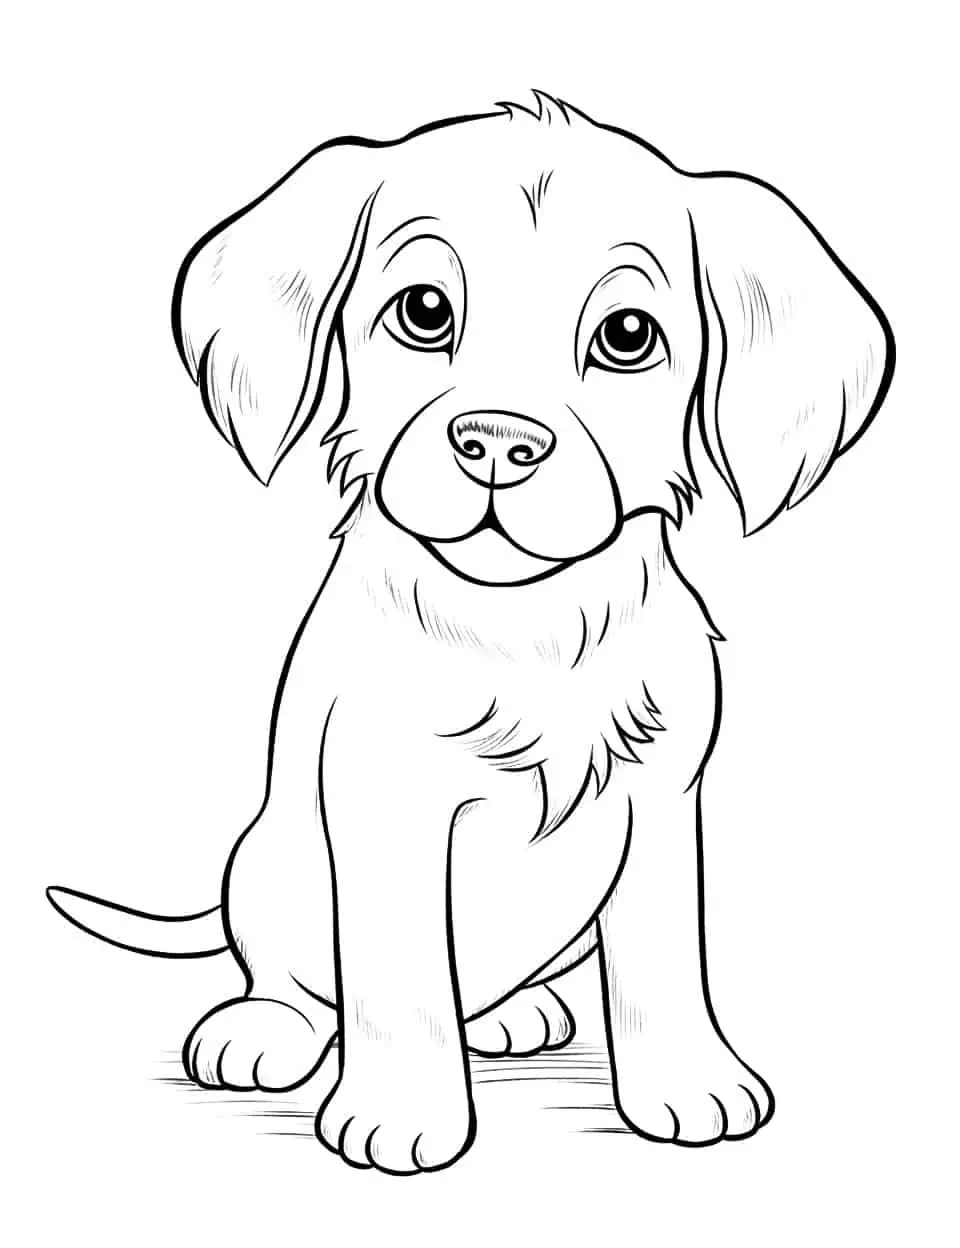 Easy Labrador Drawing Dog Coloring Page - A simple line drawing of a Labrador puppy, perfect for young kids.